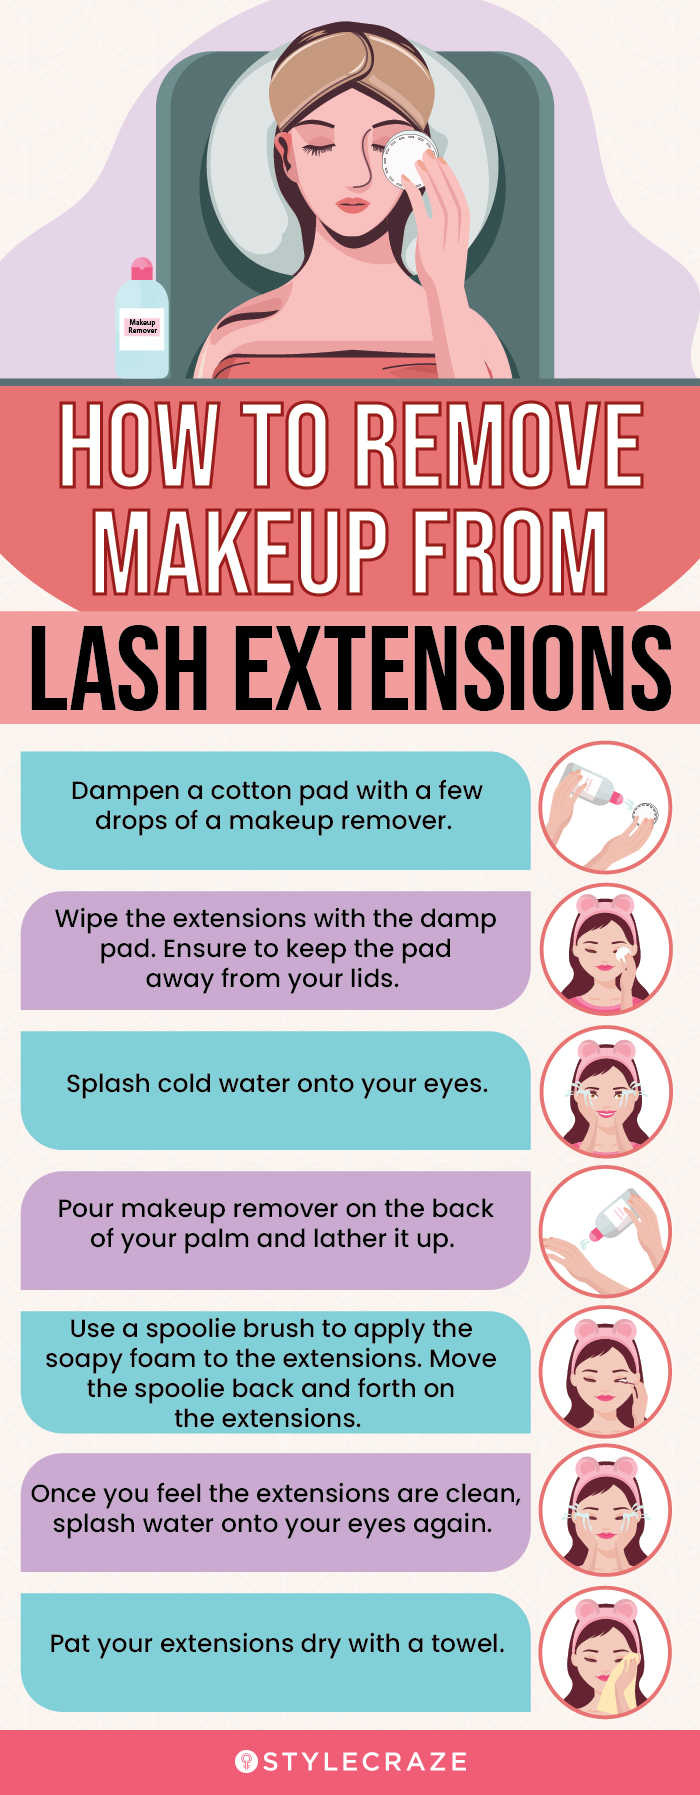 How To Remove Makeup From Lash Extensions (infographic)